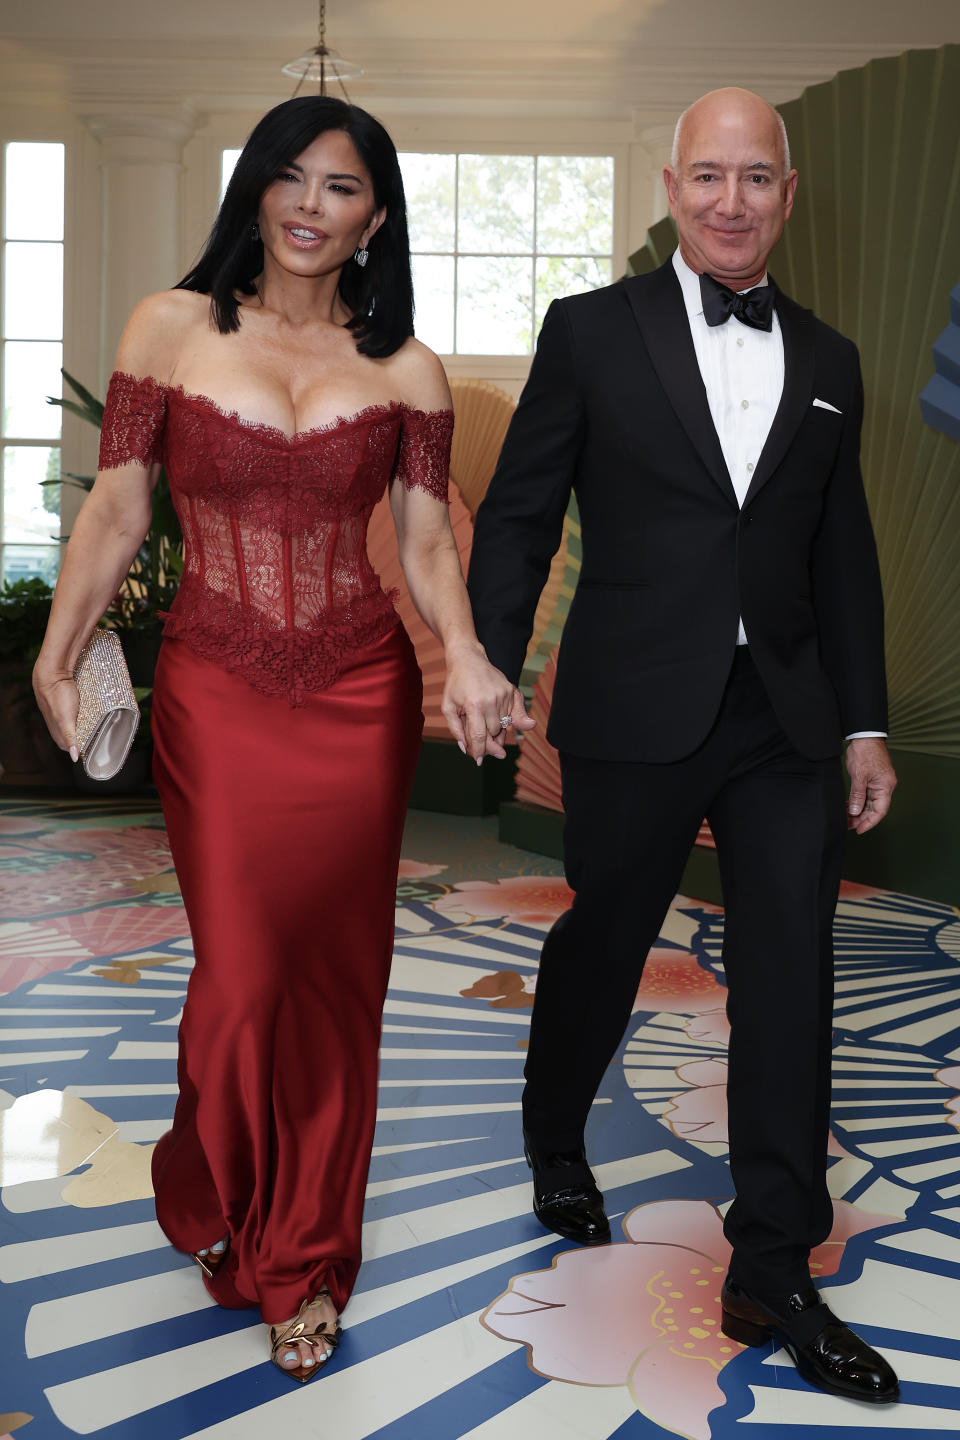 Lauren Sanchez and Jeff Bezos at the White House for a state dinner for Japanese Prime Minister Fumio Kishida.